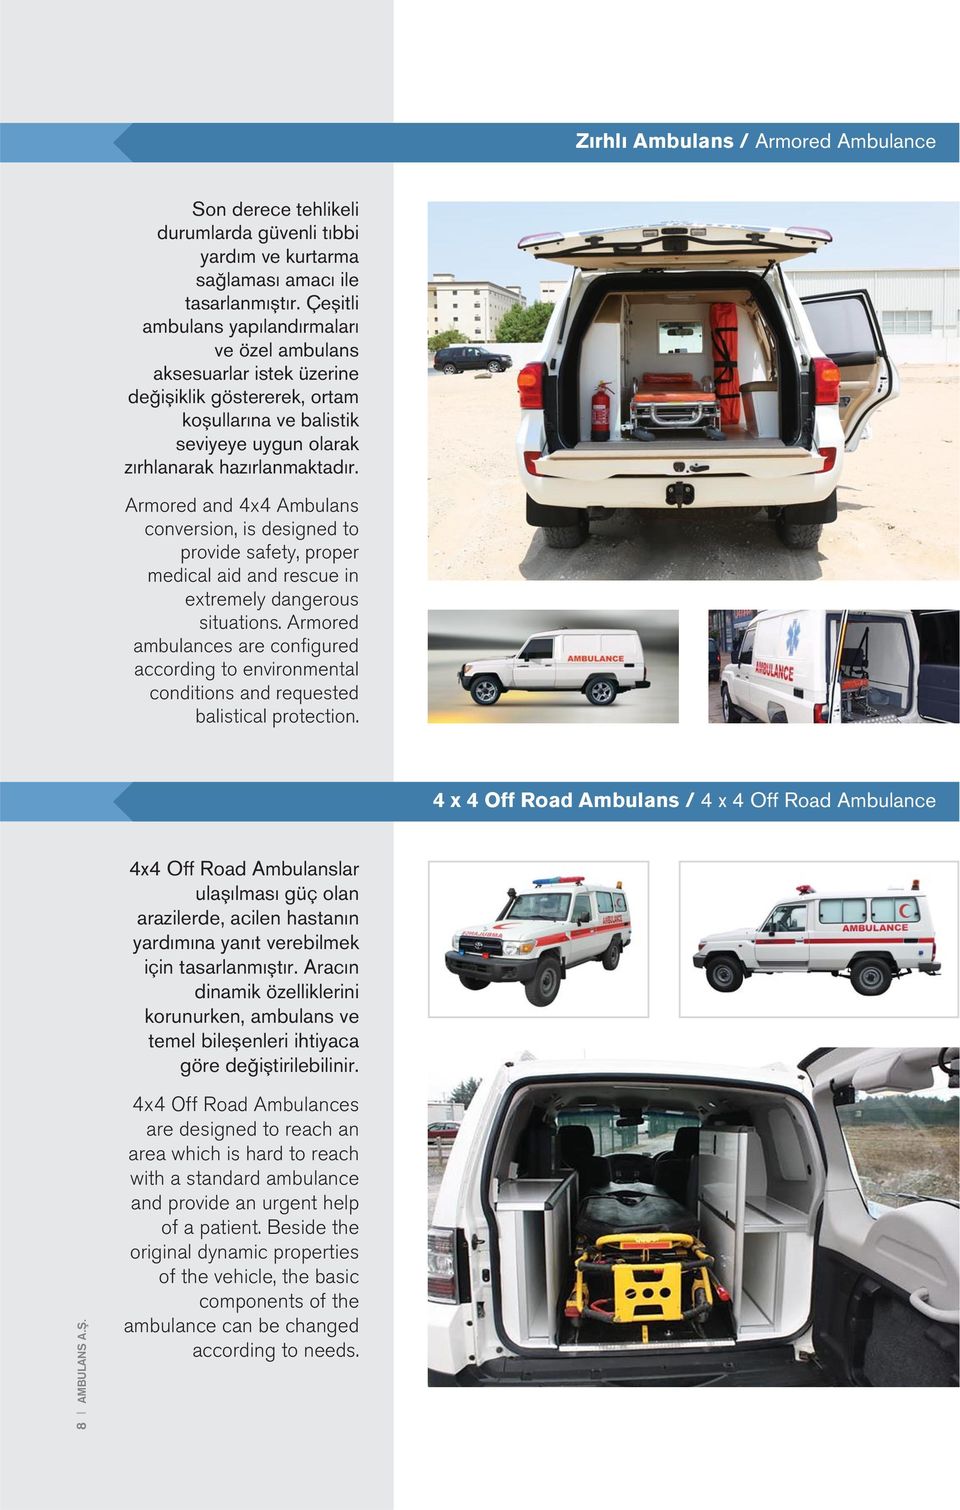 Armored and 4x4 Ambulans conversion, is designed to provide safety, proper medical aid and rescue in extremely dangerous situations.